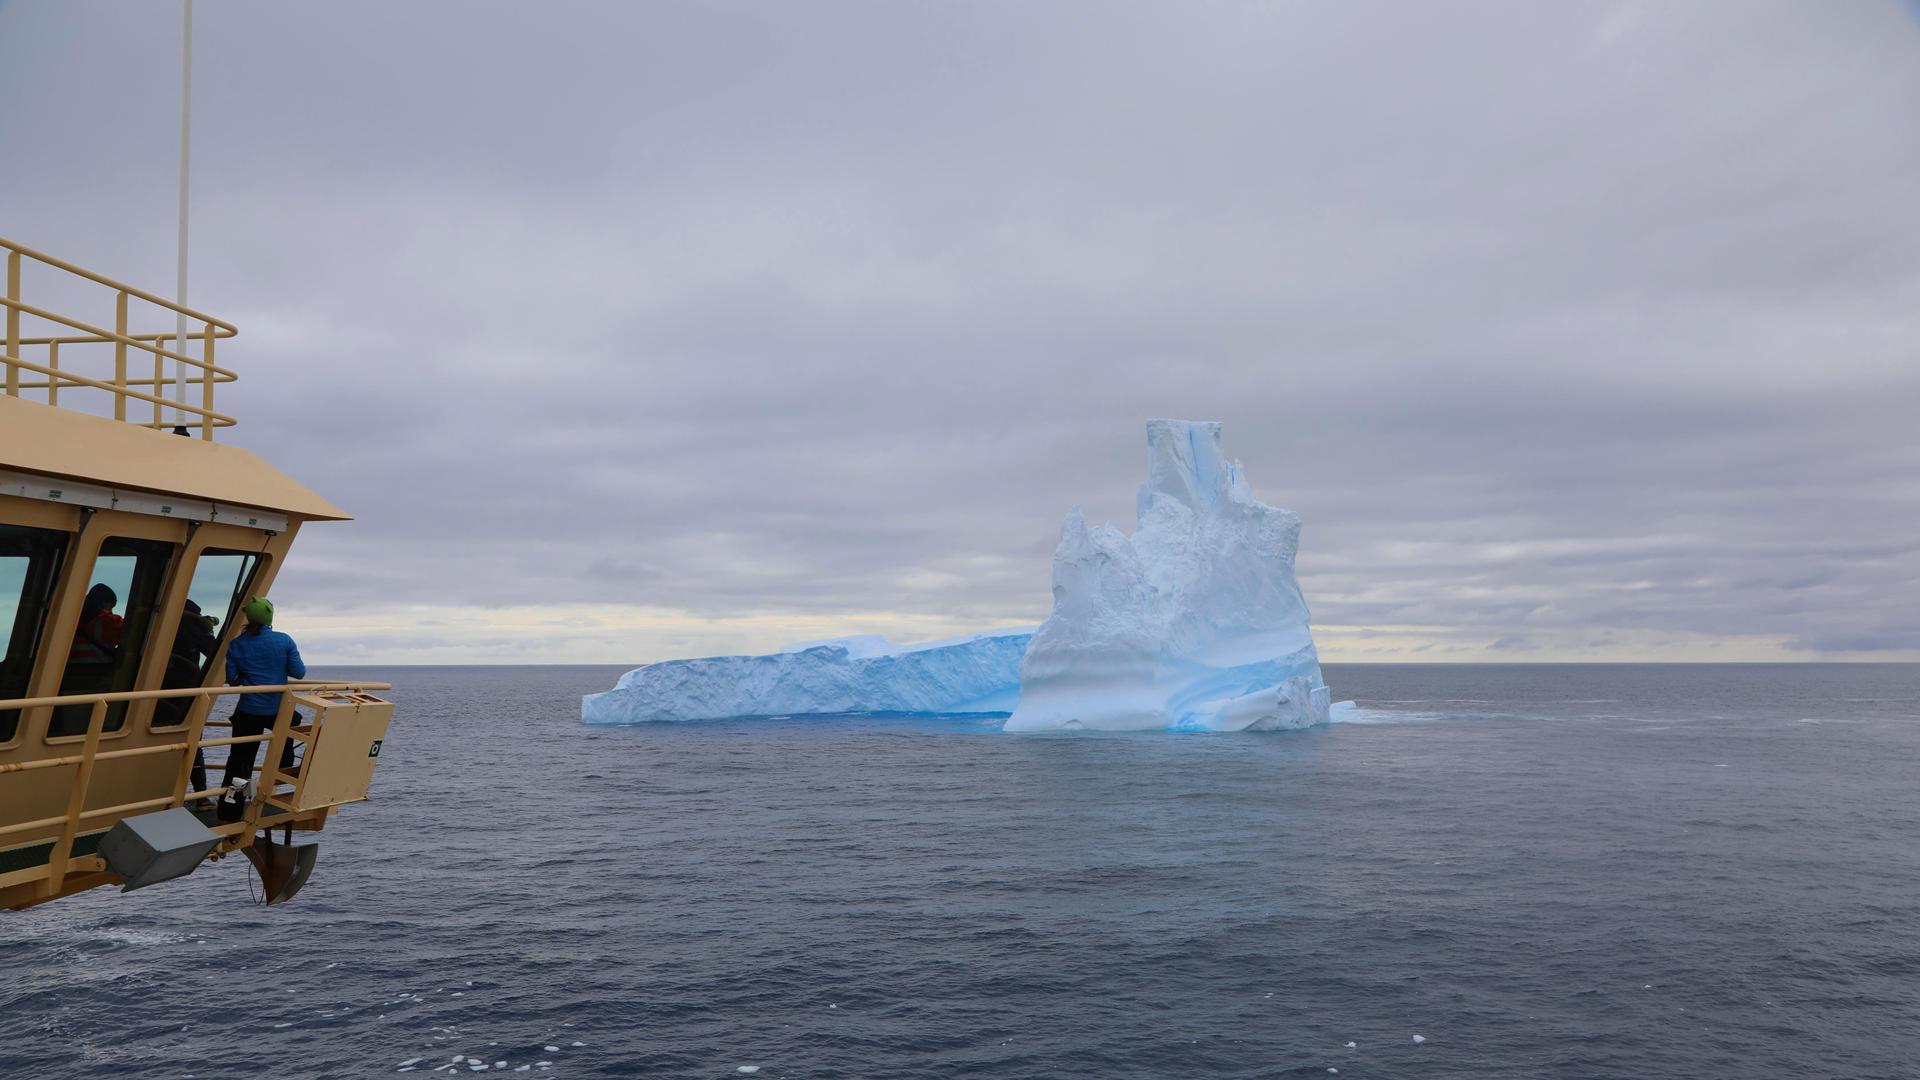 Researchers aboard the Nathanial B. Palmer gather on the ship’s bridge to view one of the first icebergs they encountered. 